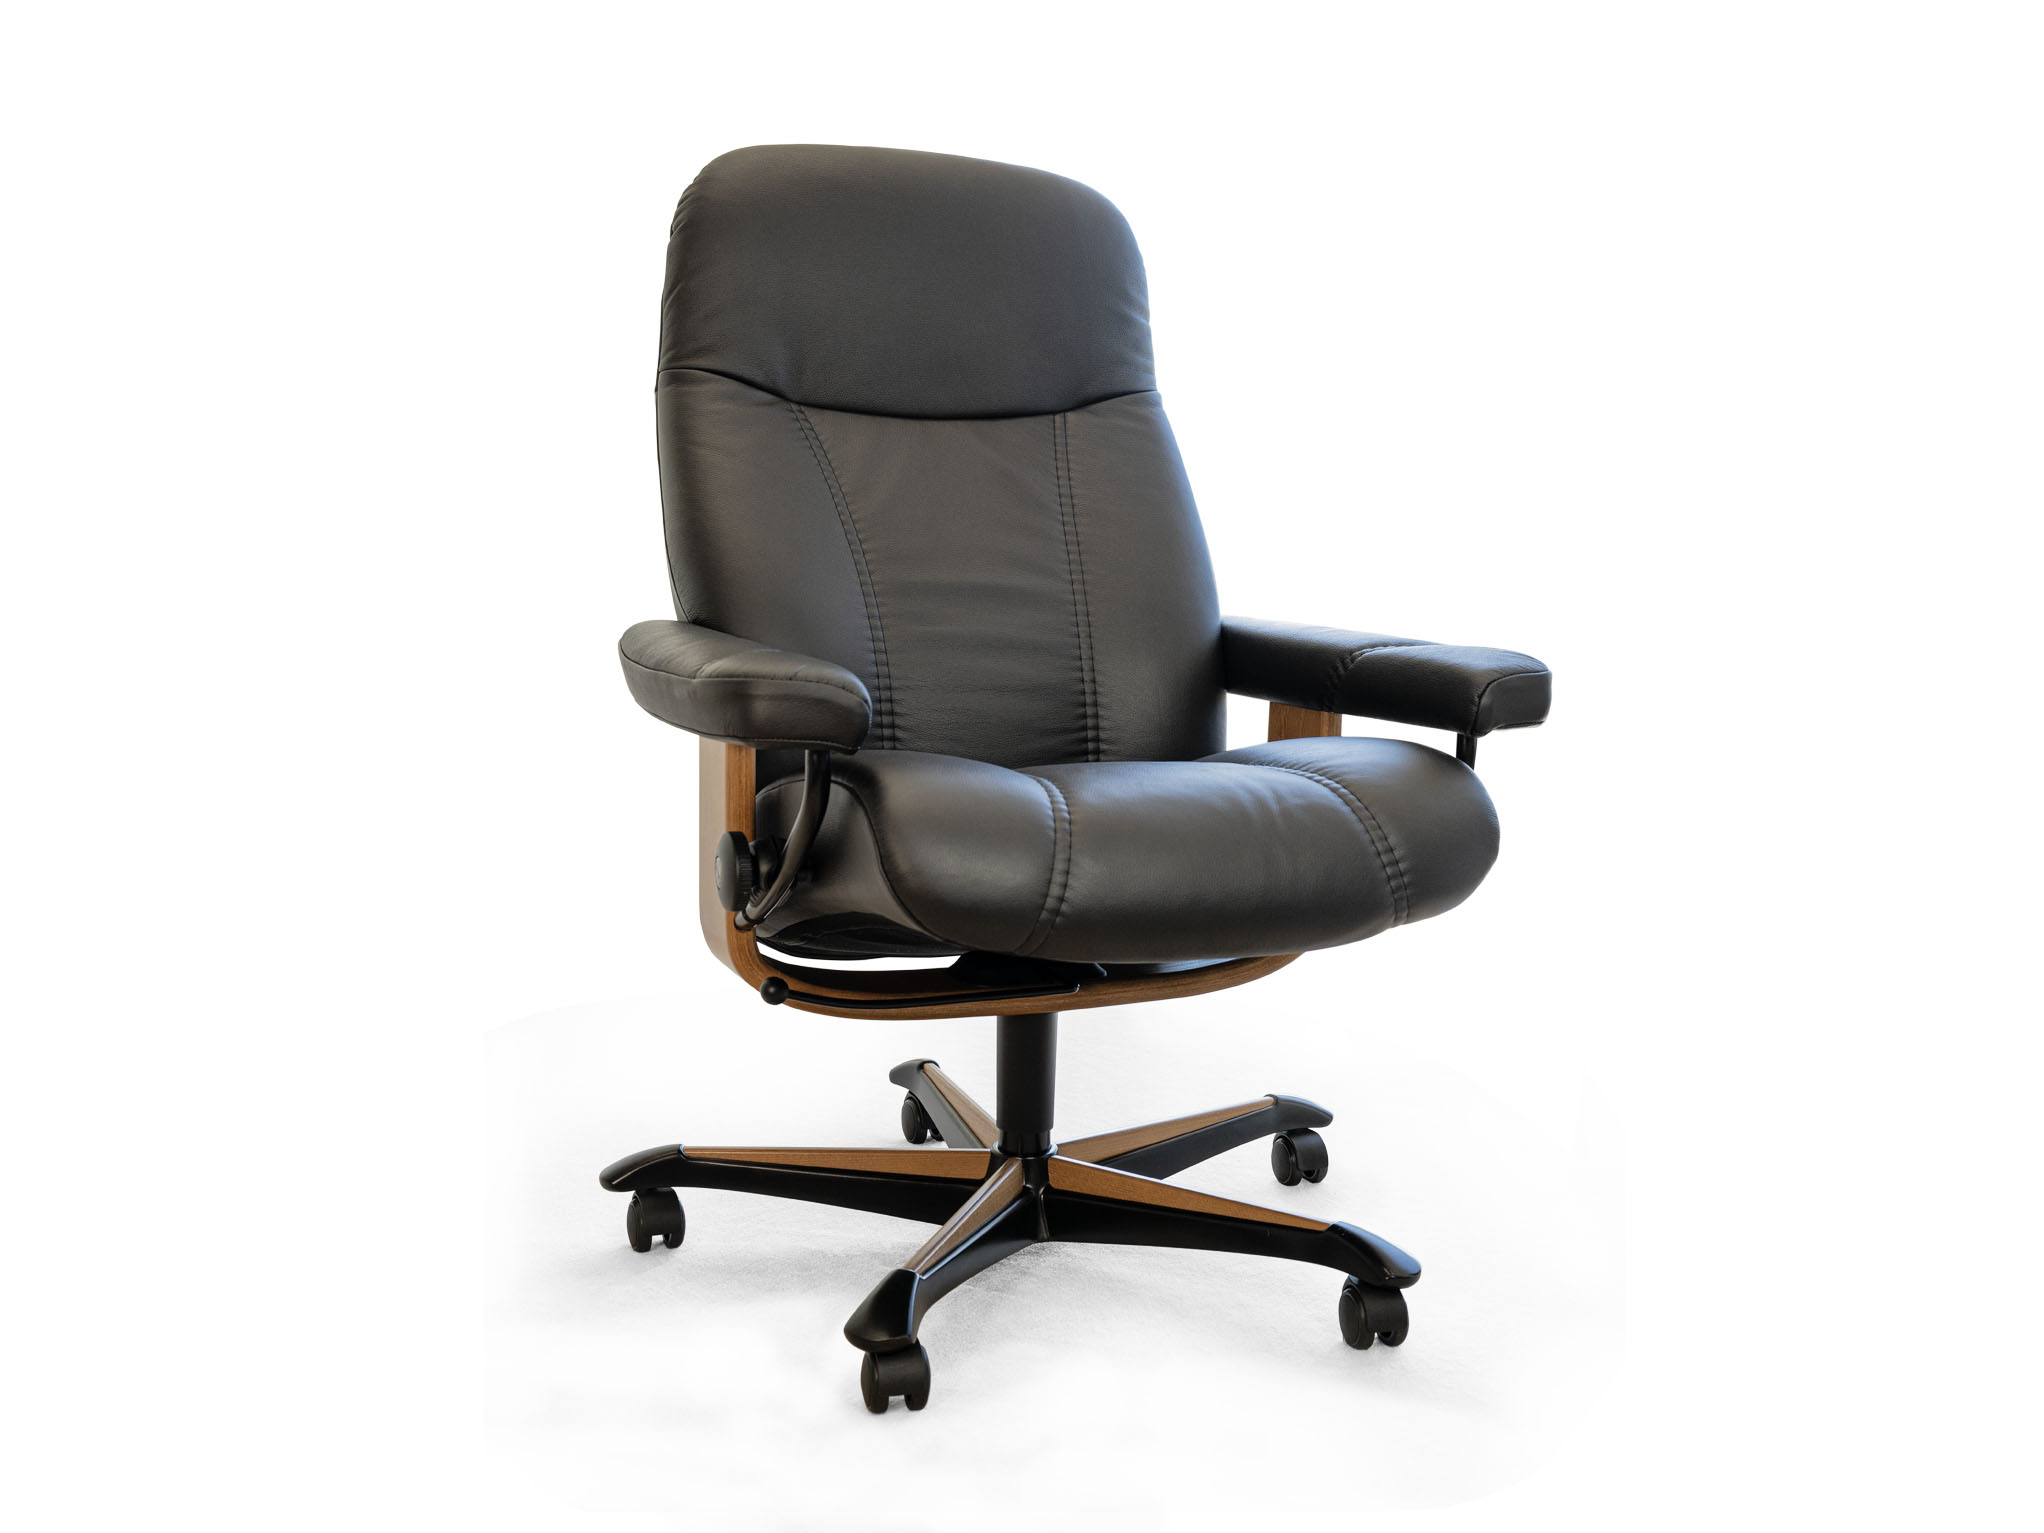 Stressless Consul Office chair - Batick Black Leather